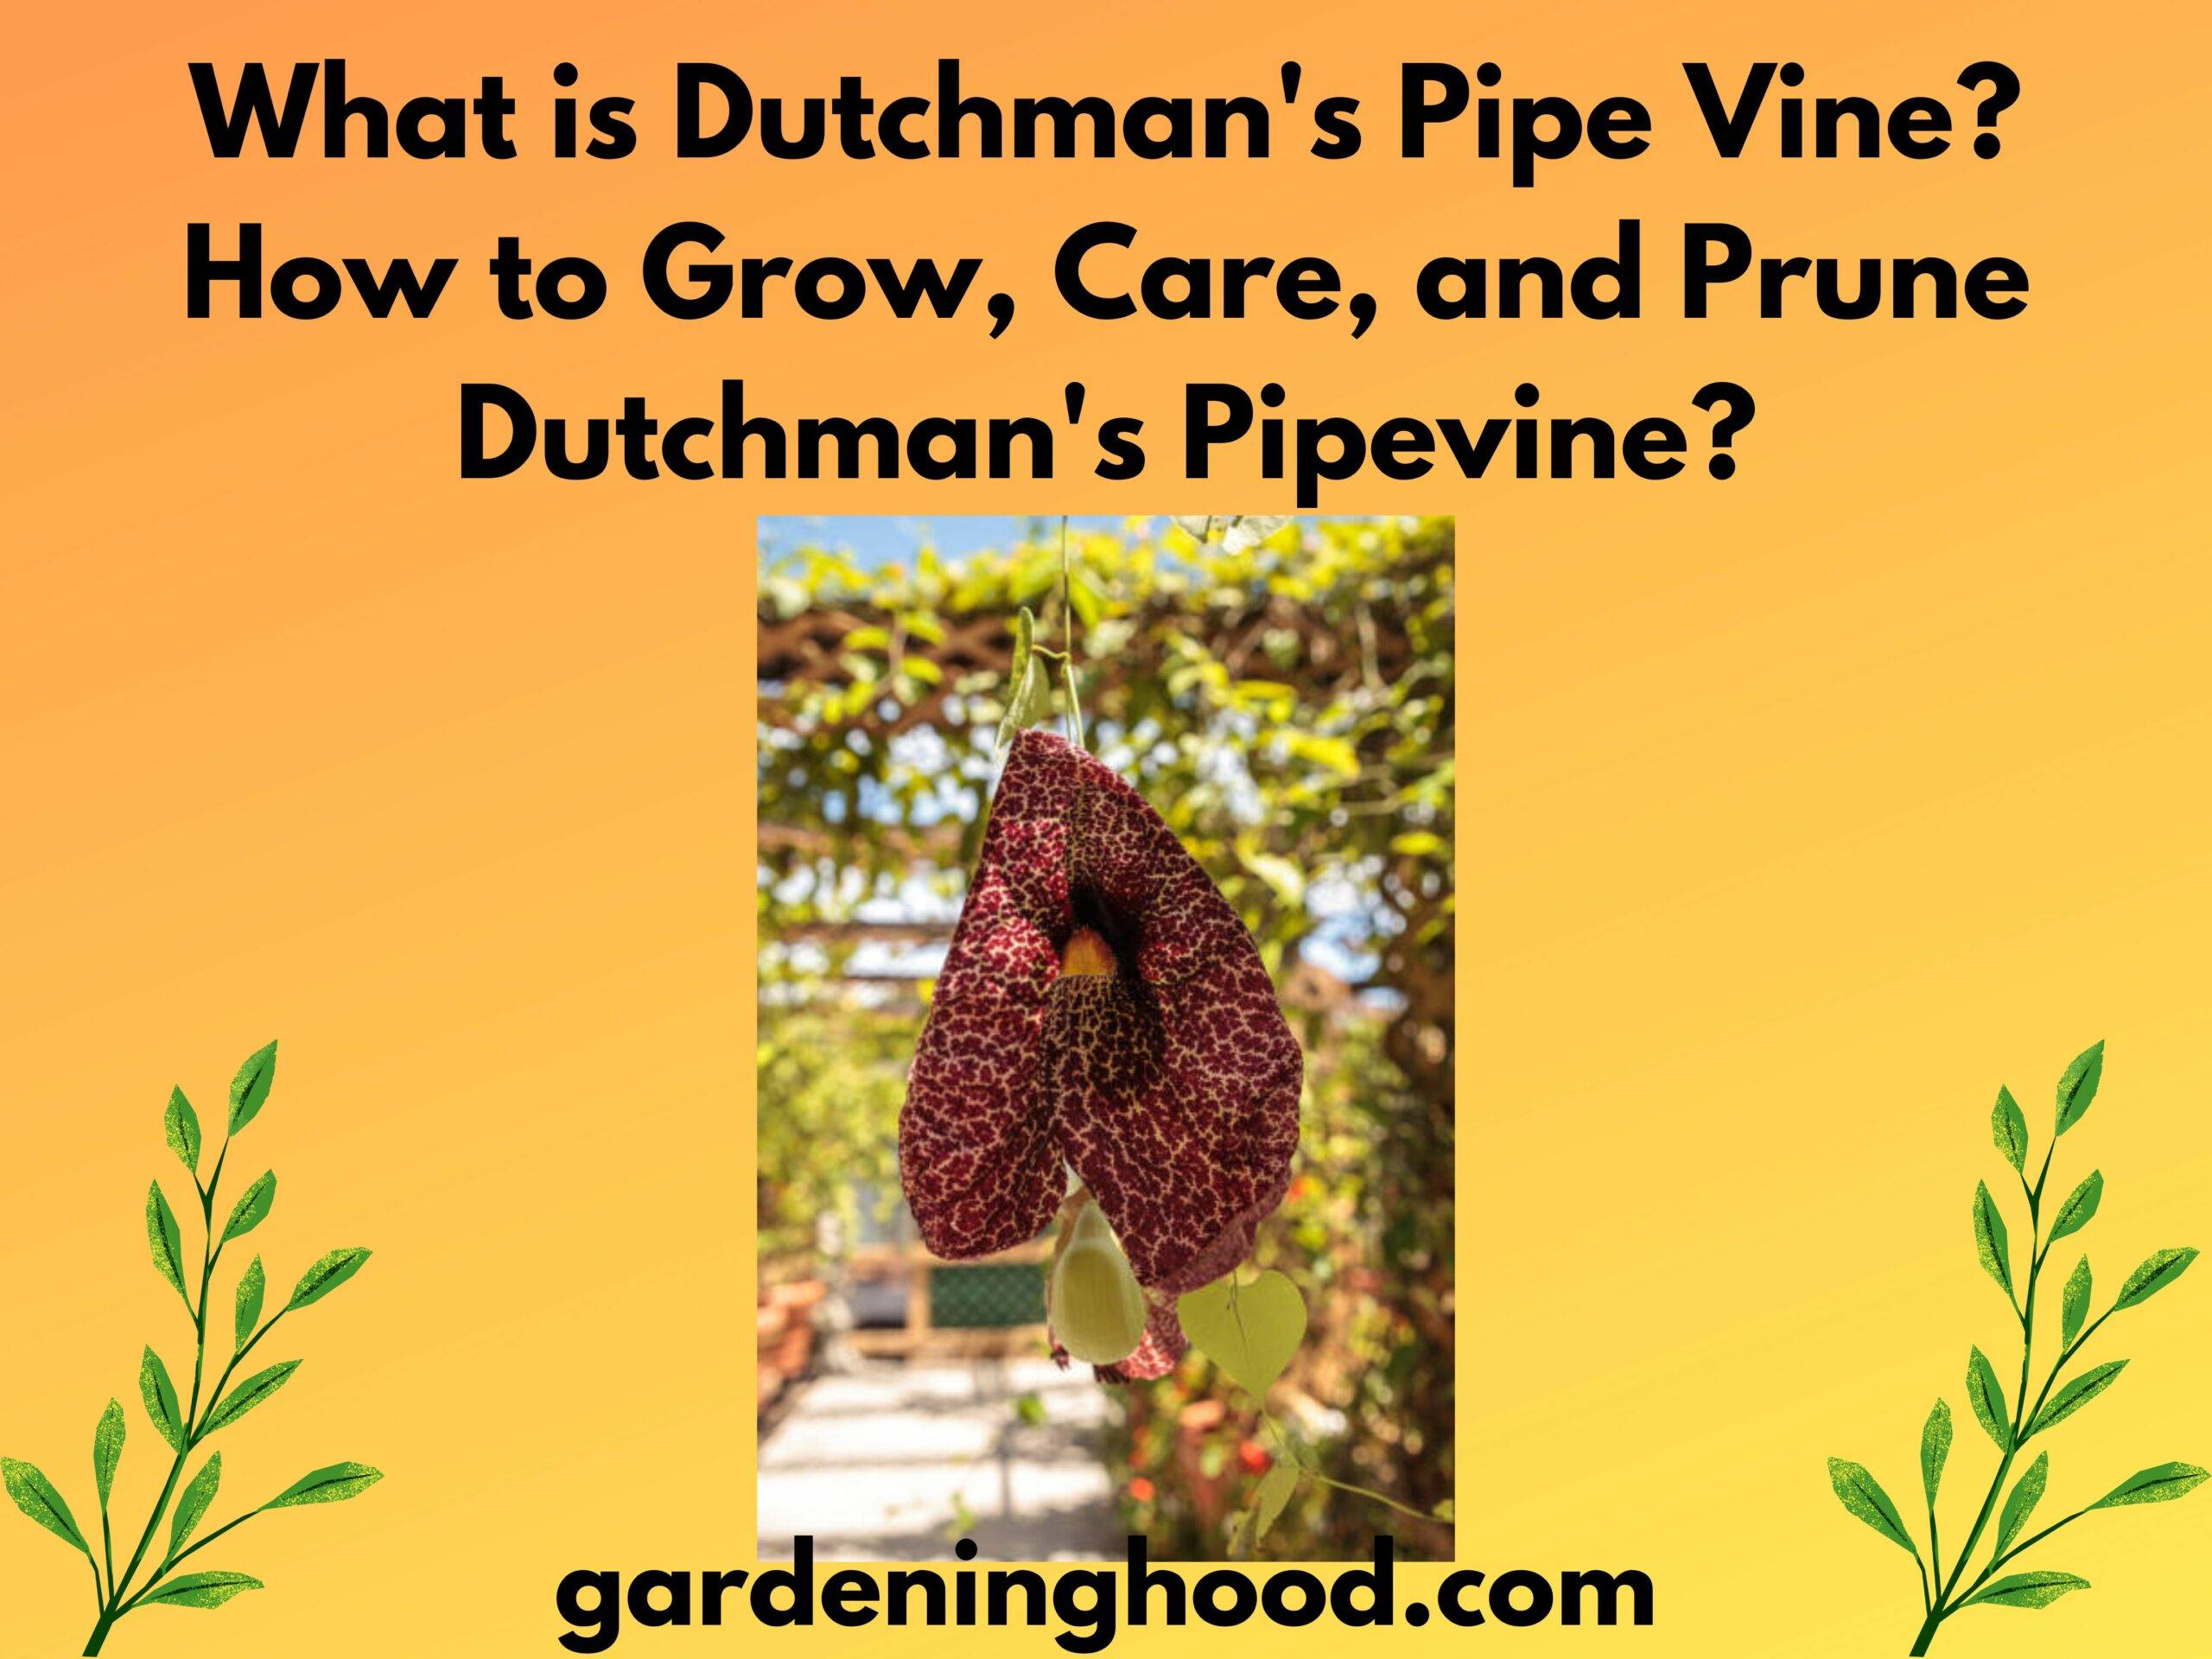 What is Dutchman's Pipe Vine? How to Grow, Care, and Prune Dutchman's Pipevine?